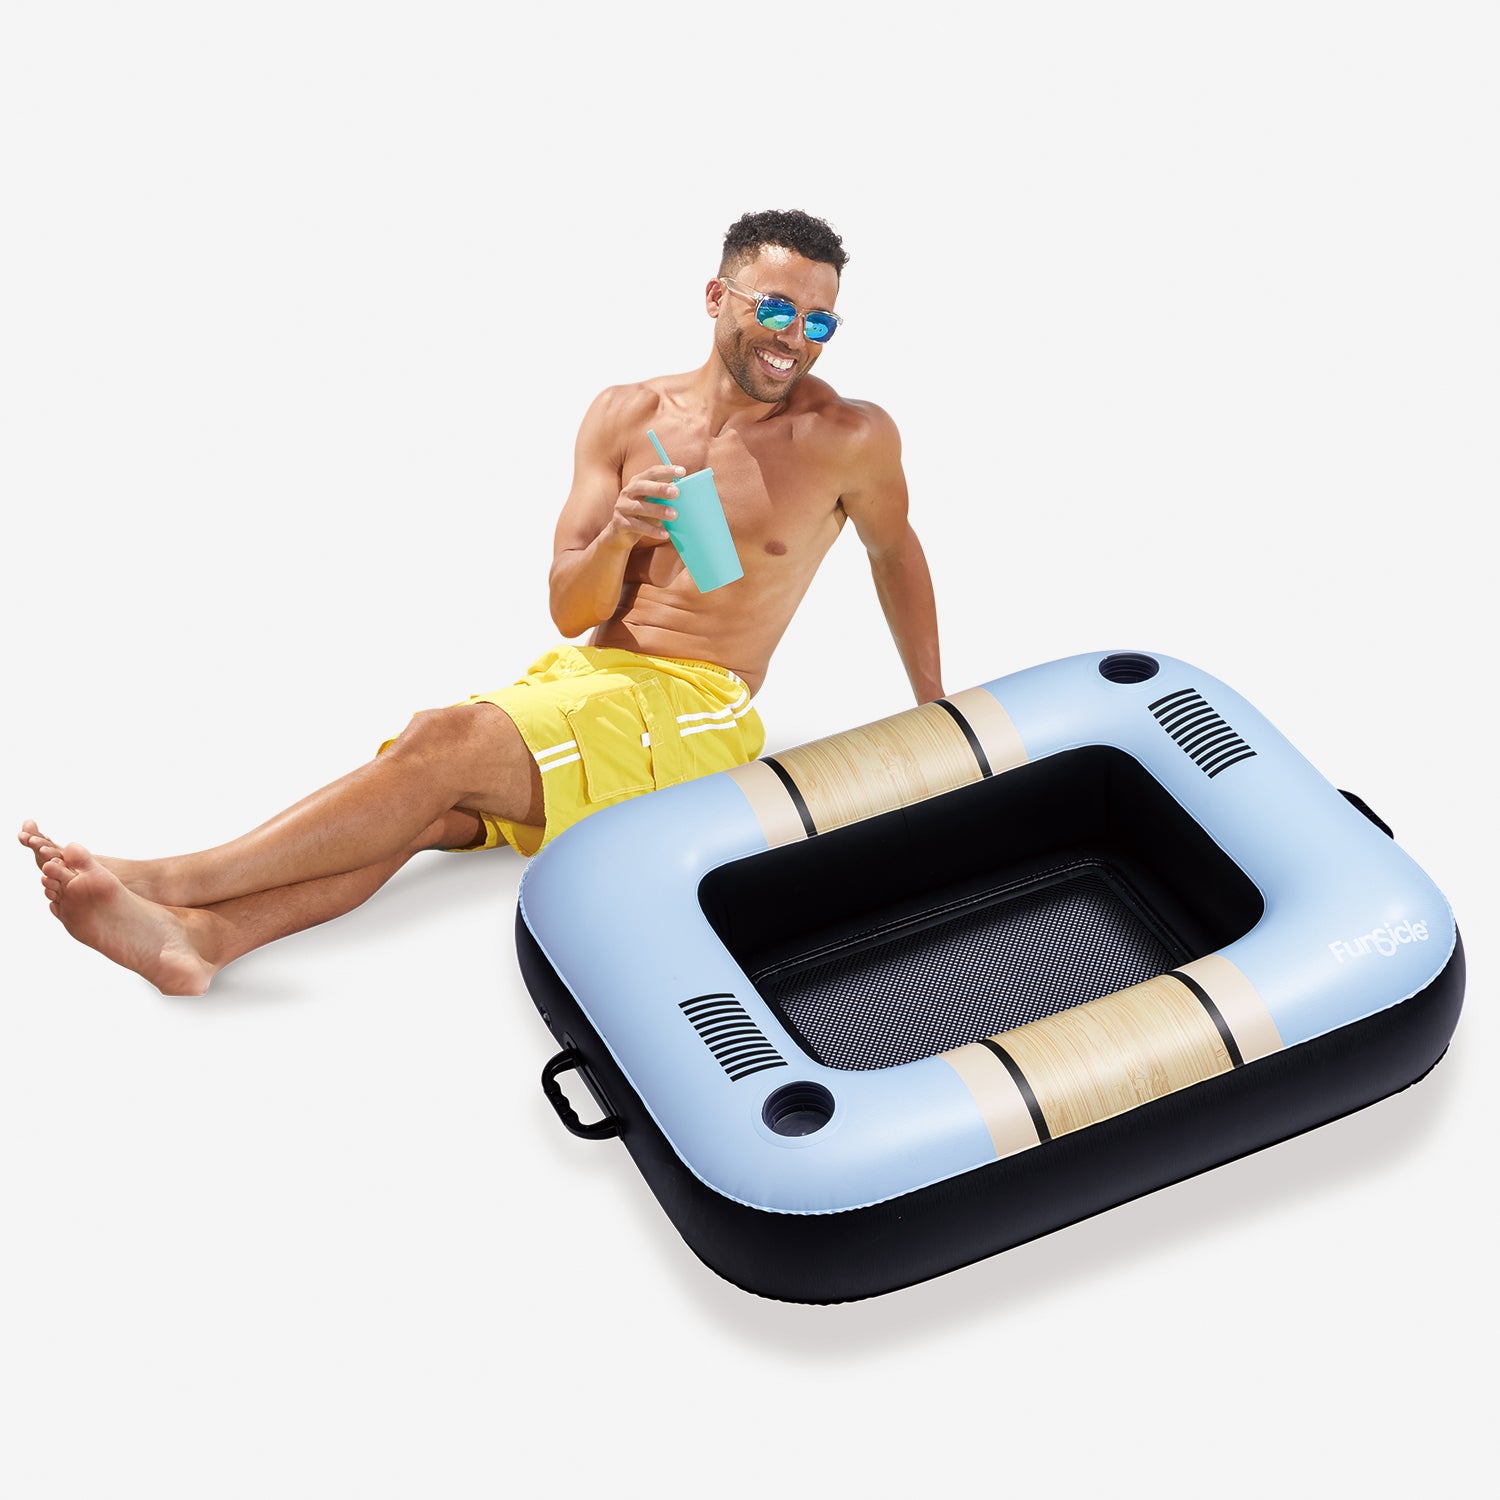 Funsicle Tahoe Cooler Float  with a model next to it